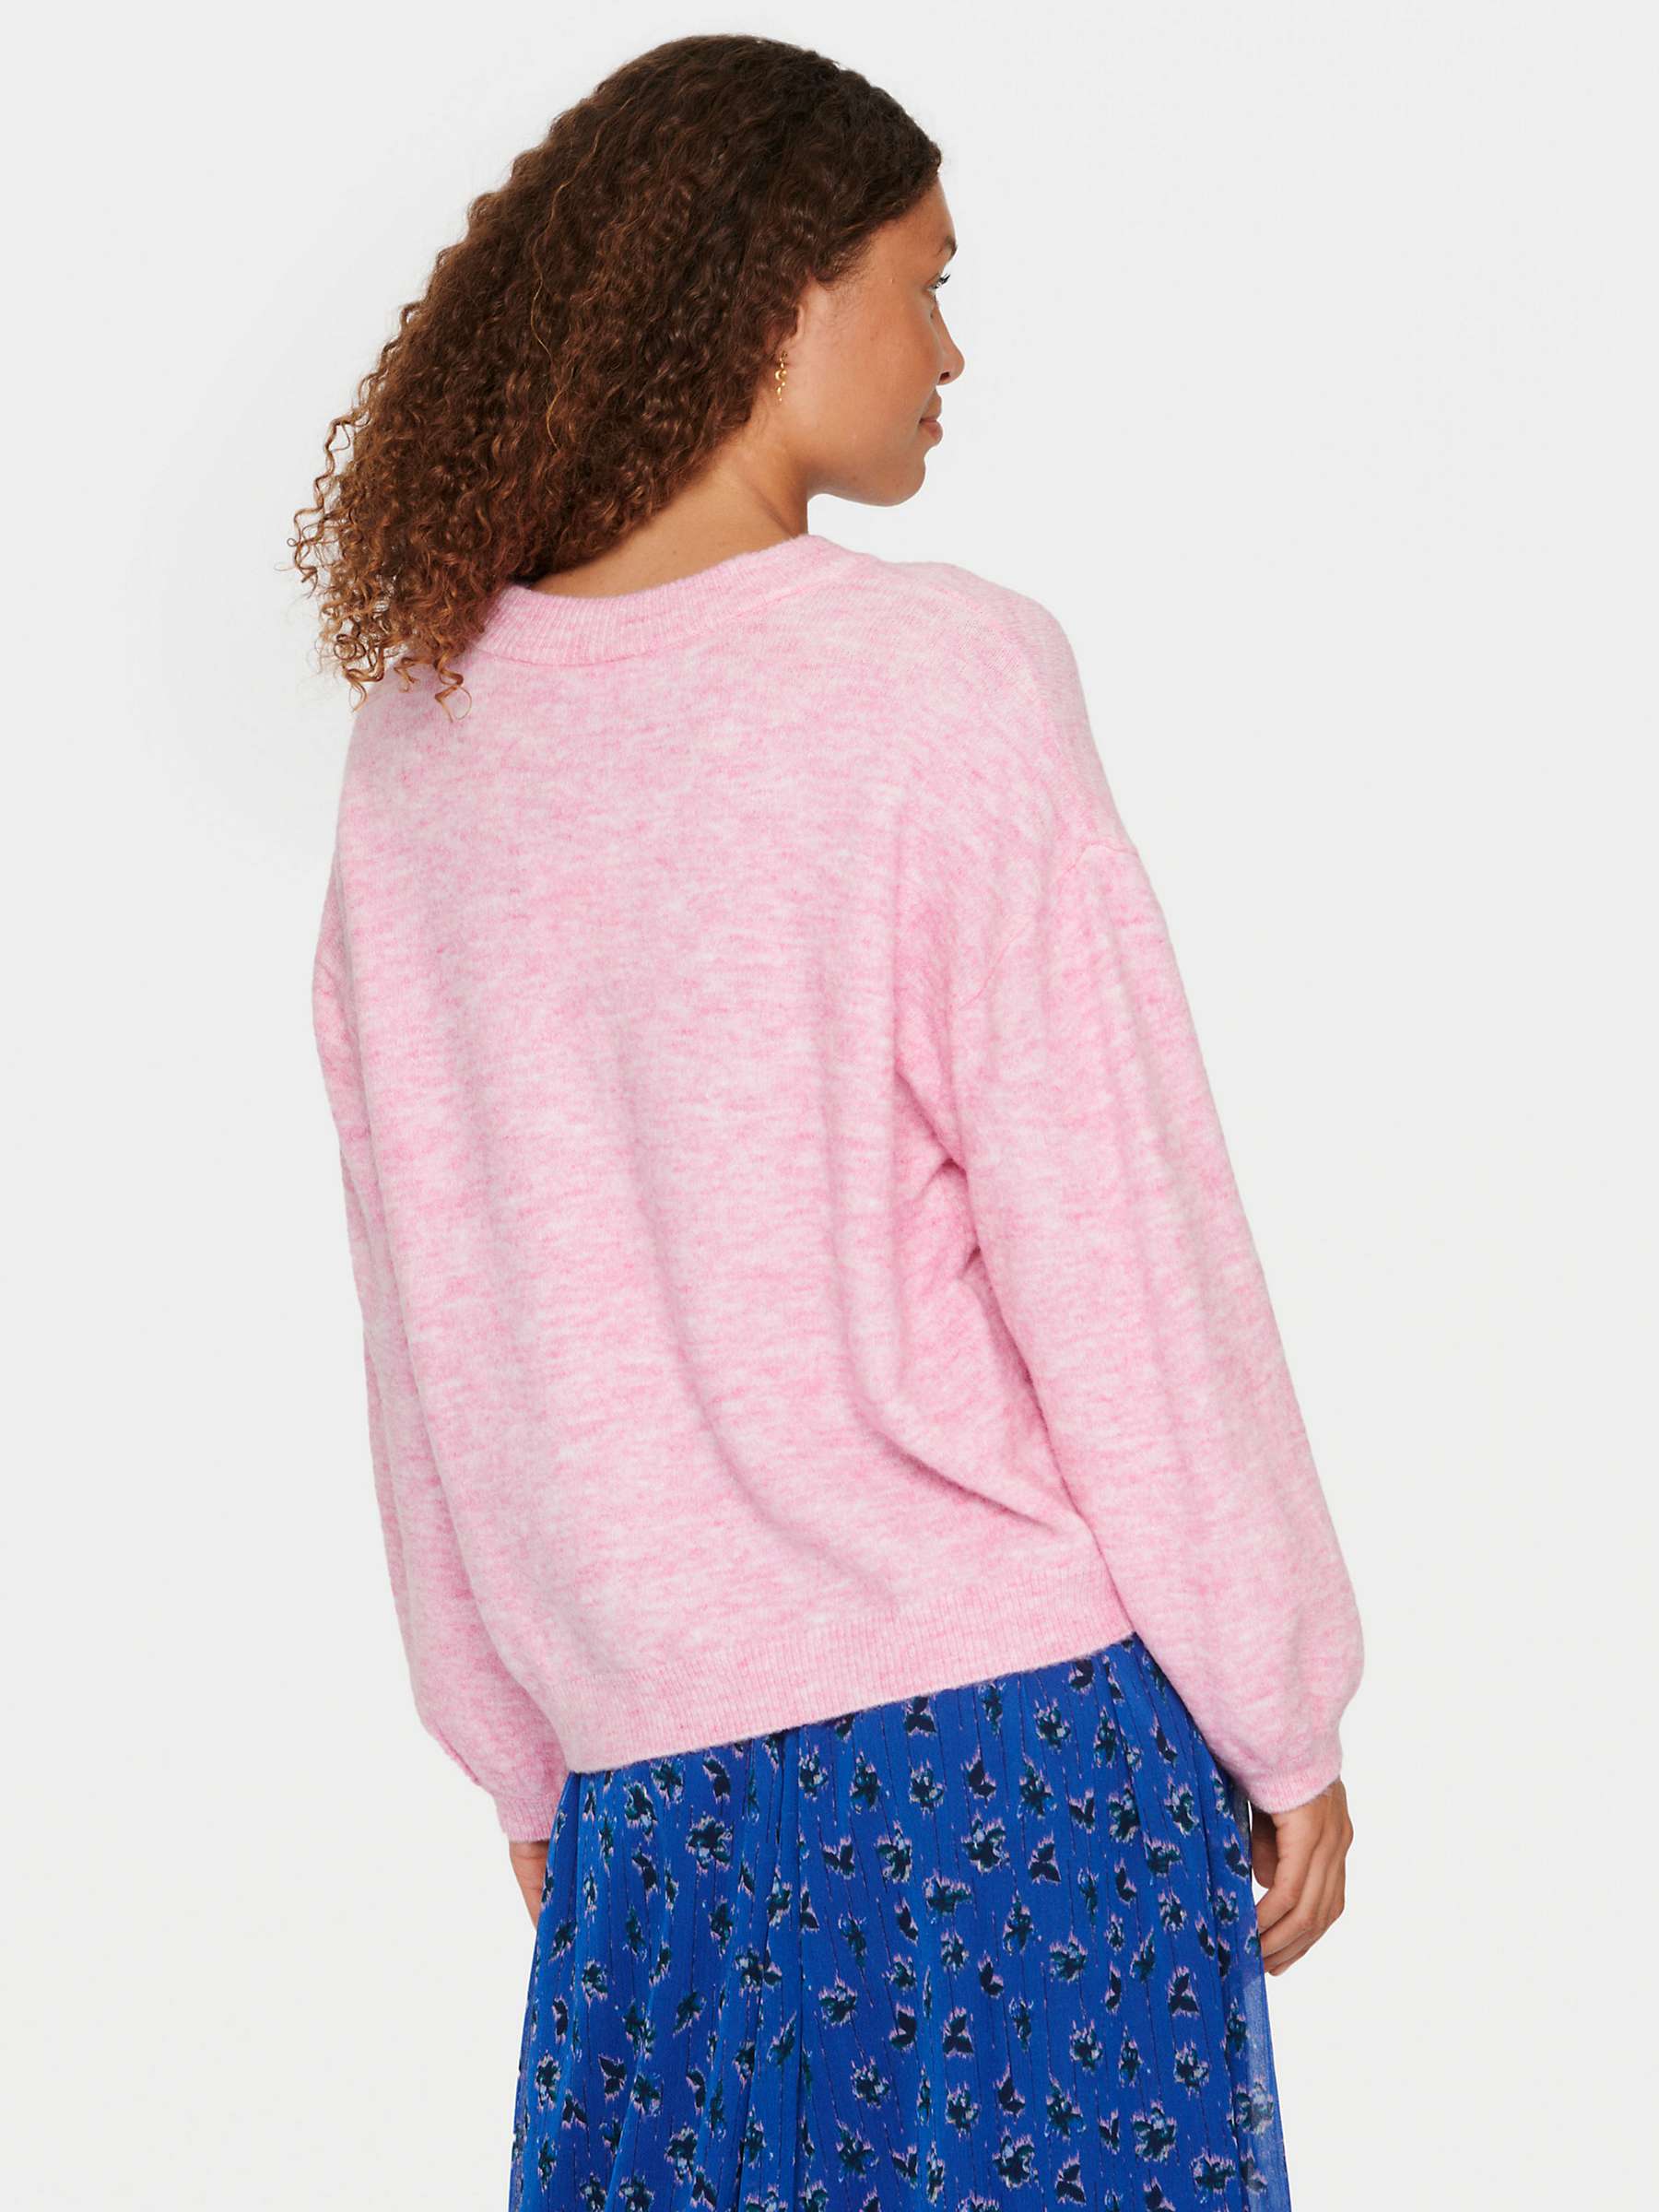 Buy Saint Tropez Trixie Relaxed Balloon Sleeve Jumper Online at johnlewis.com